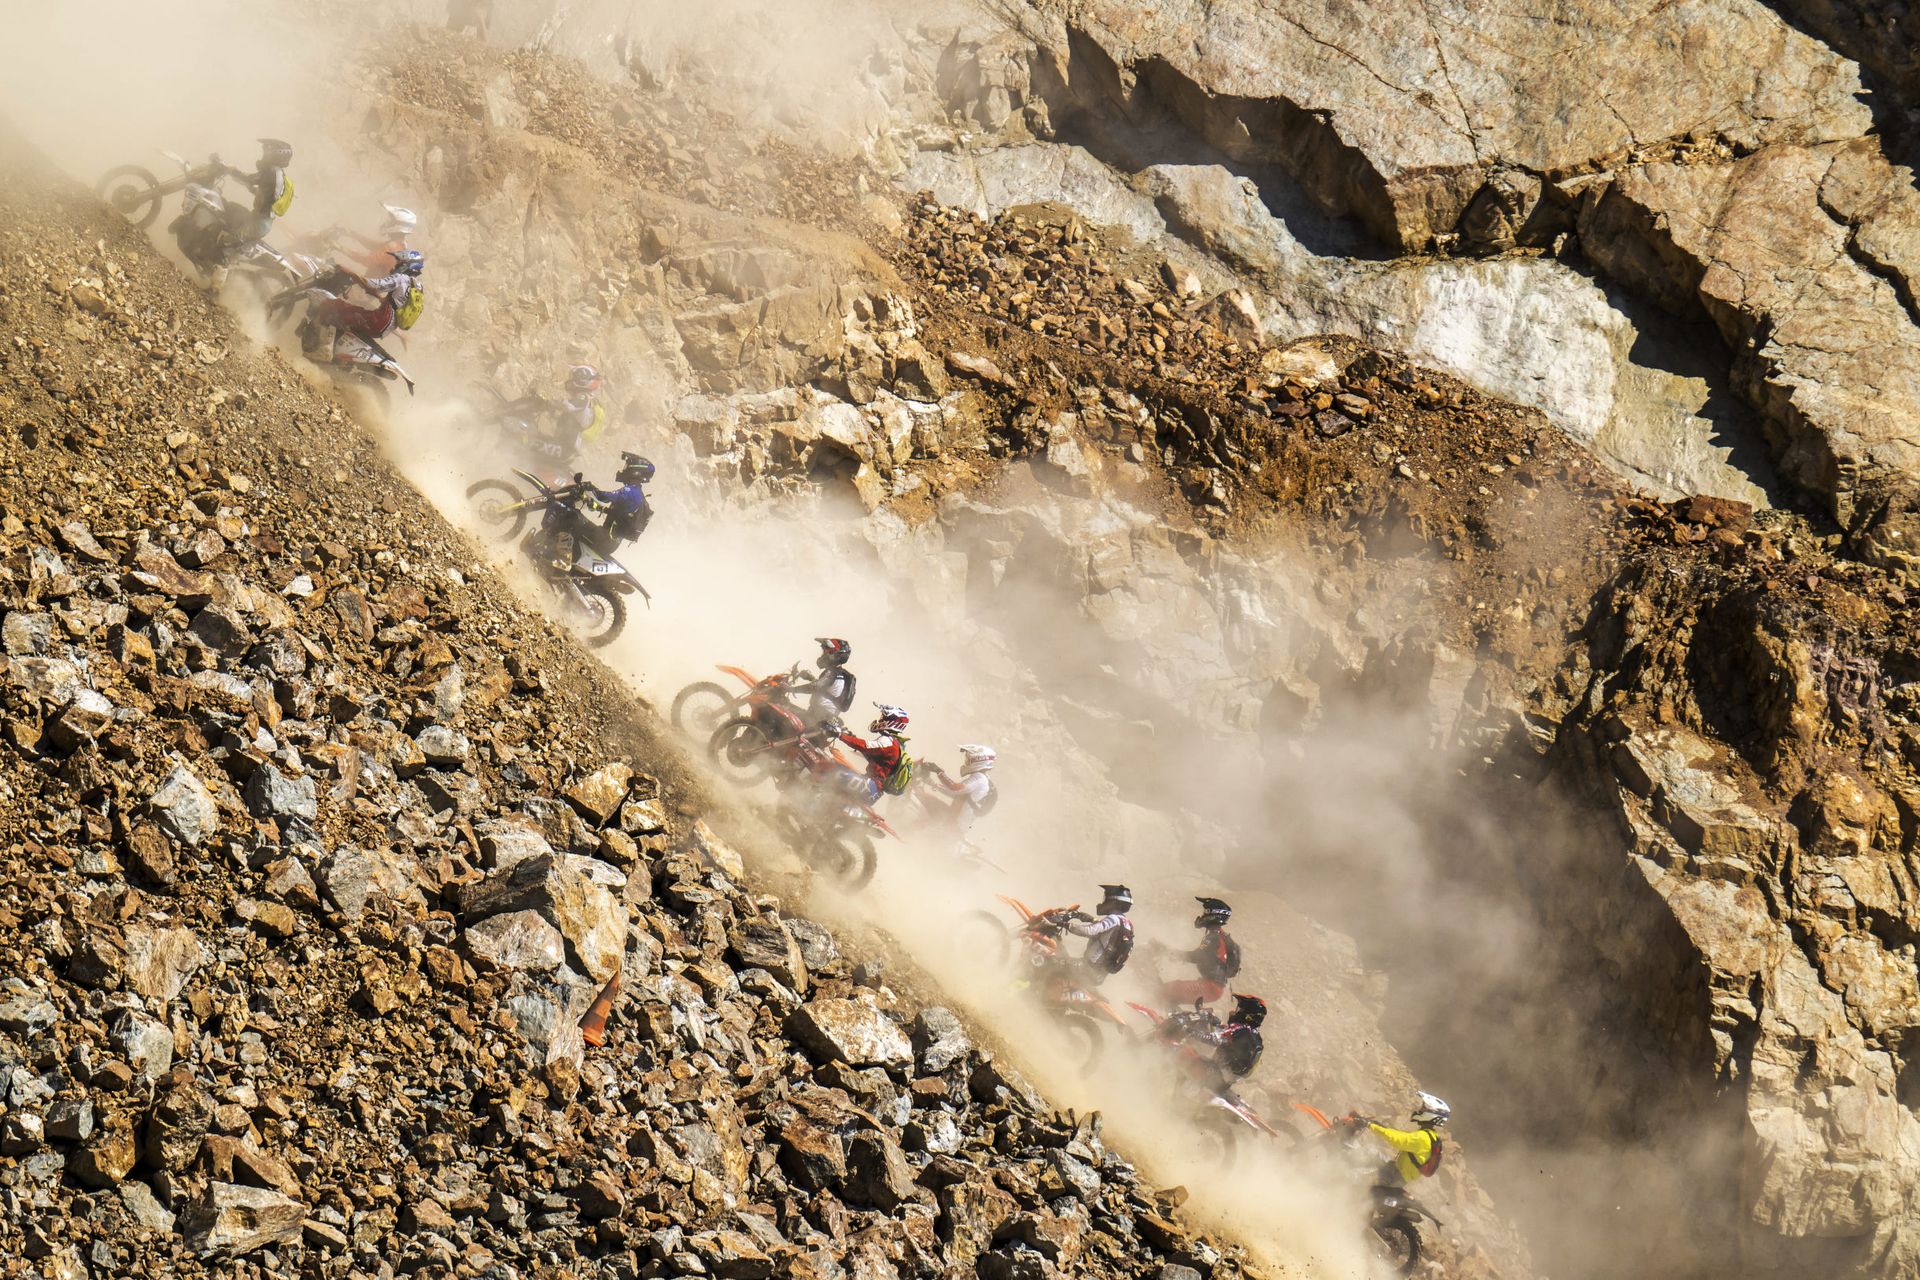 riders driving up a mountain